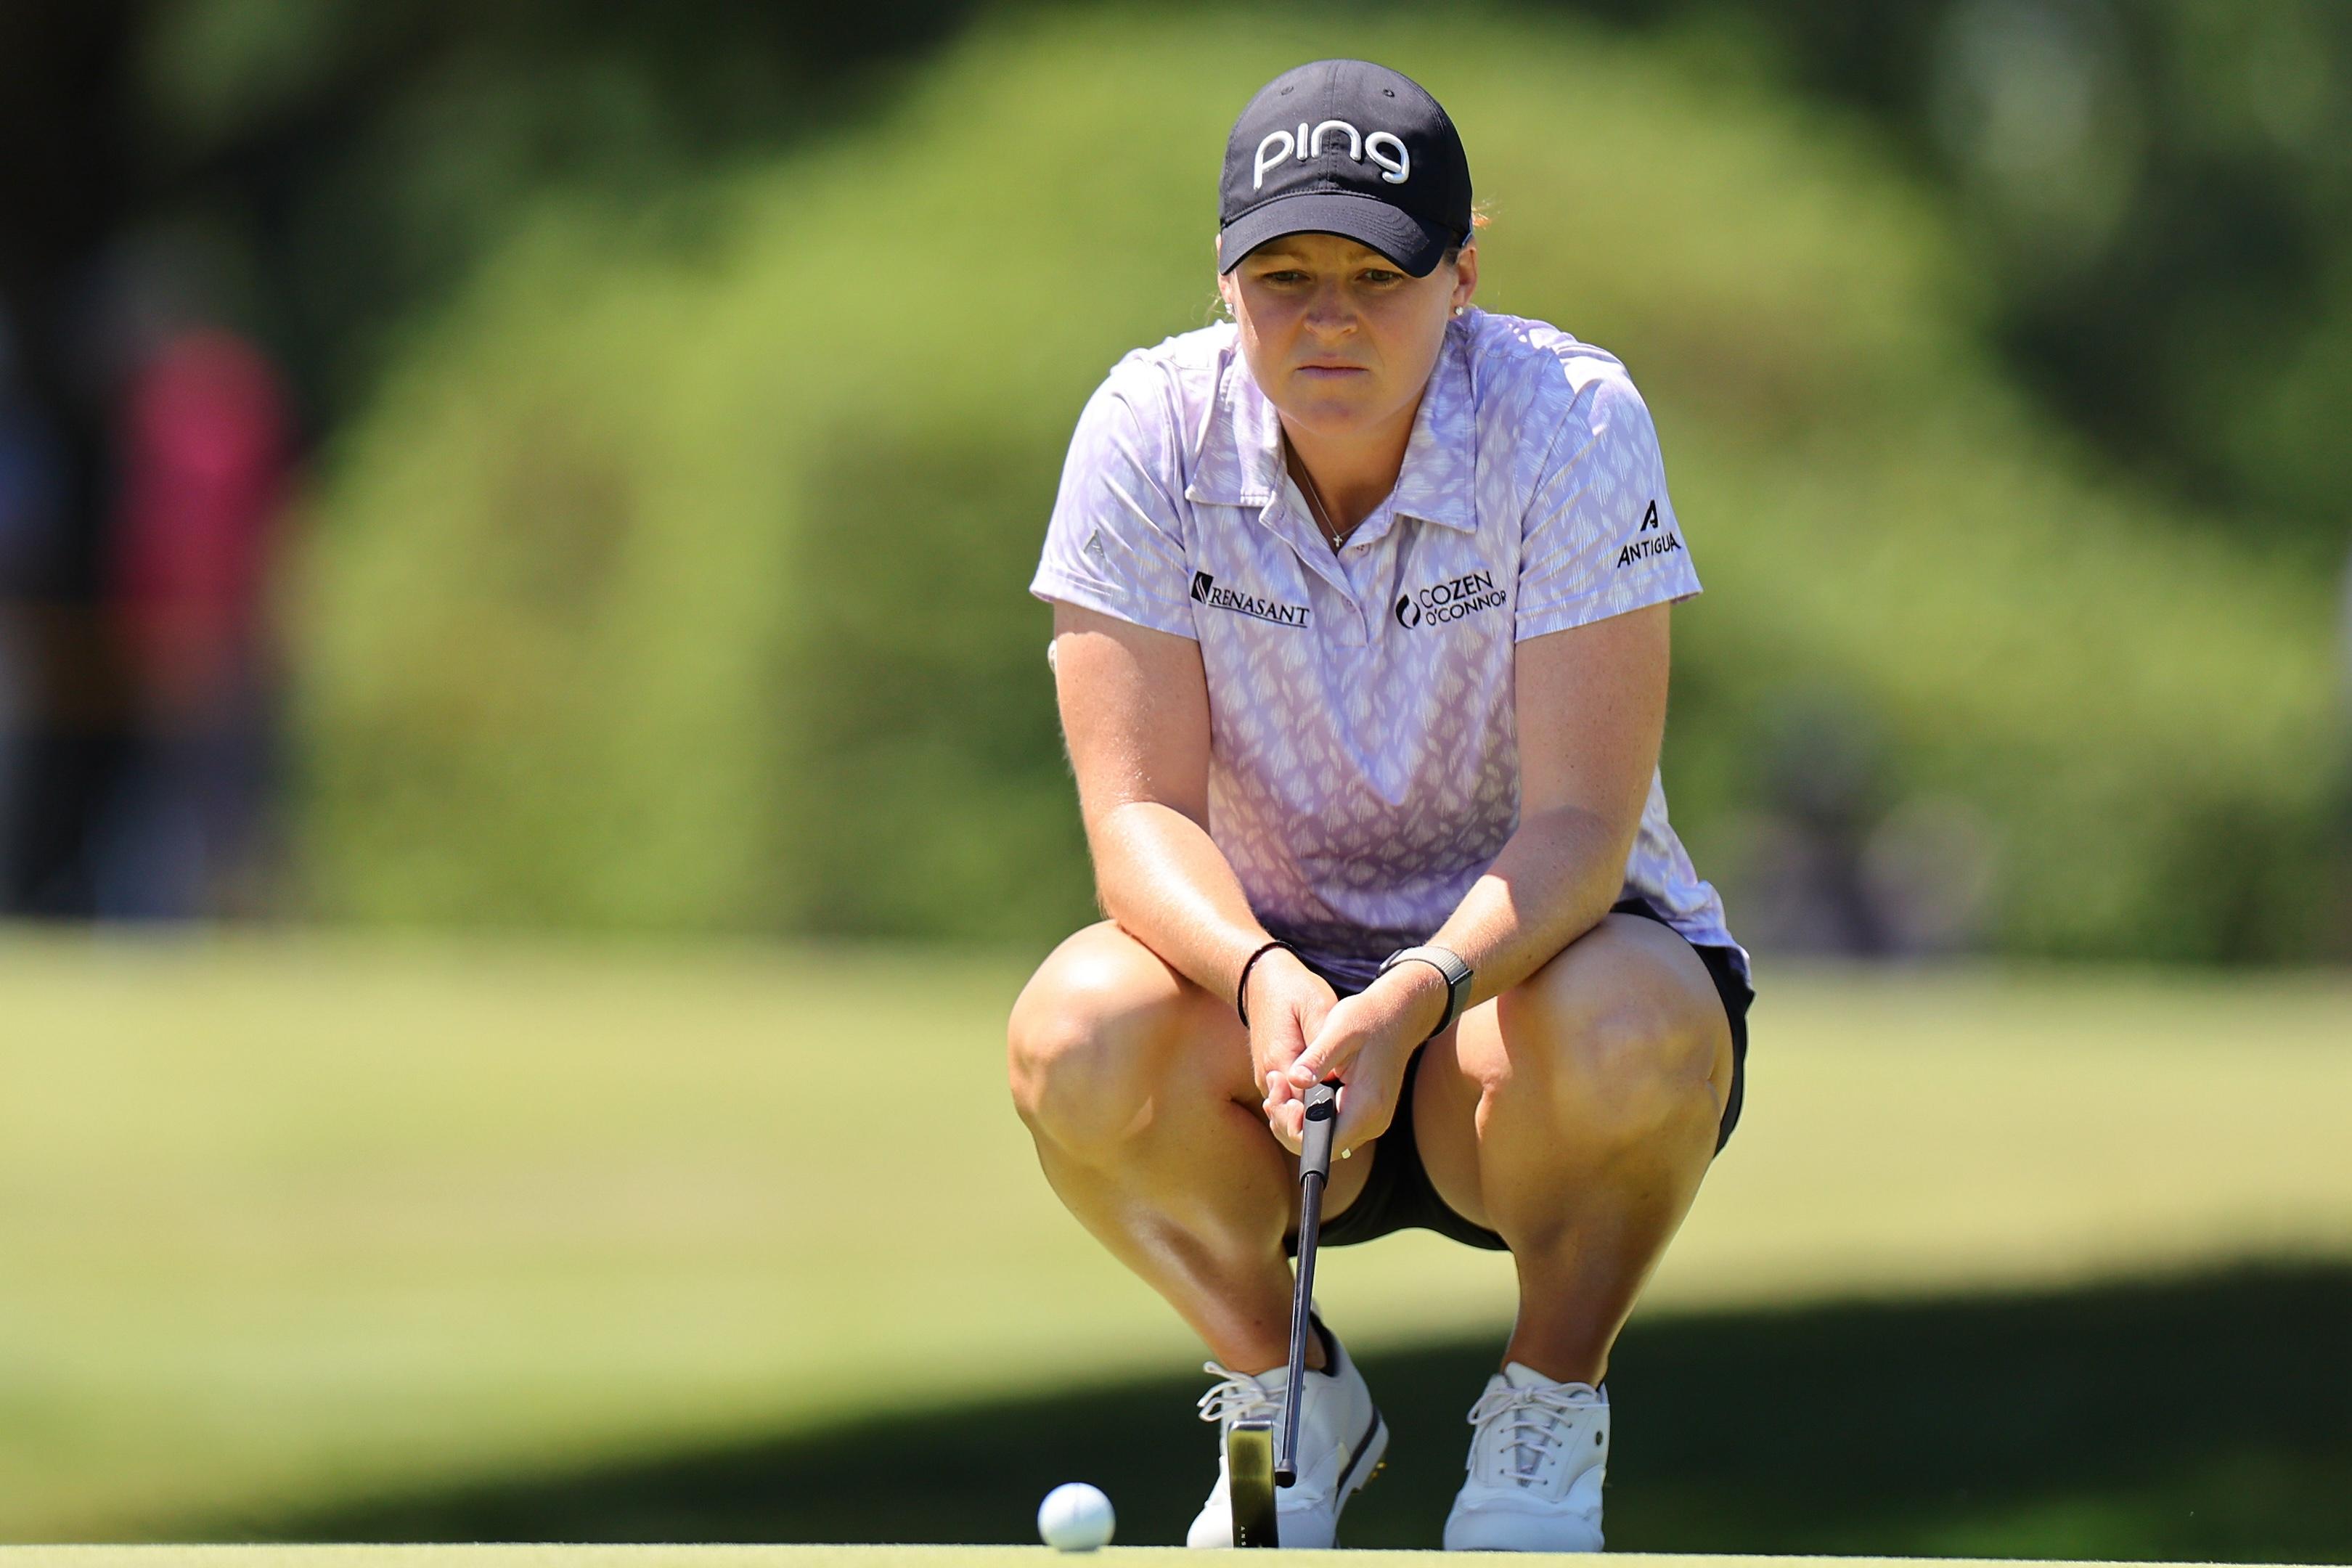 Ally Ewing, Grace Kim Tied for Lead at Meijer LPGA Classic